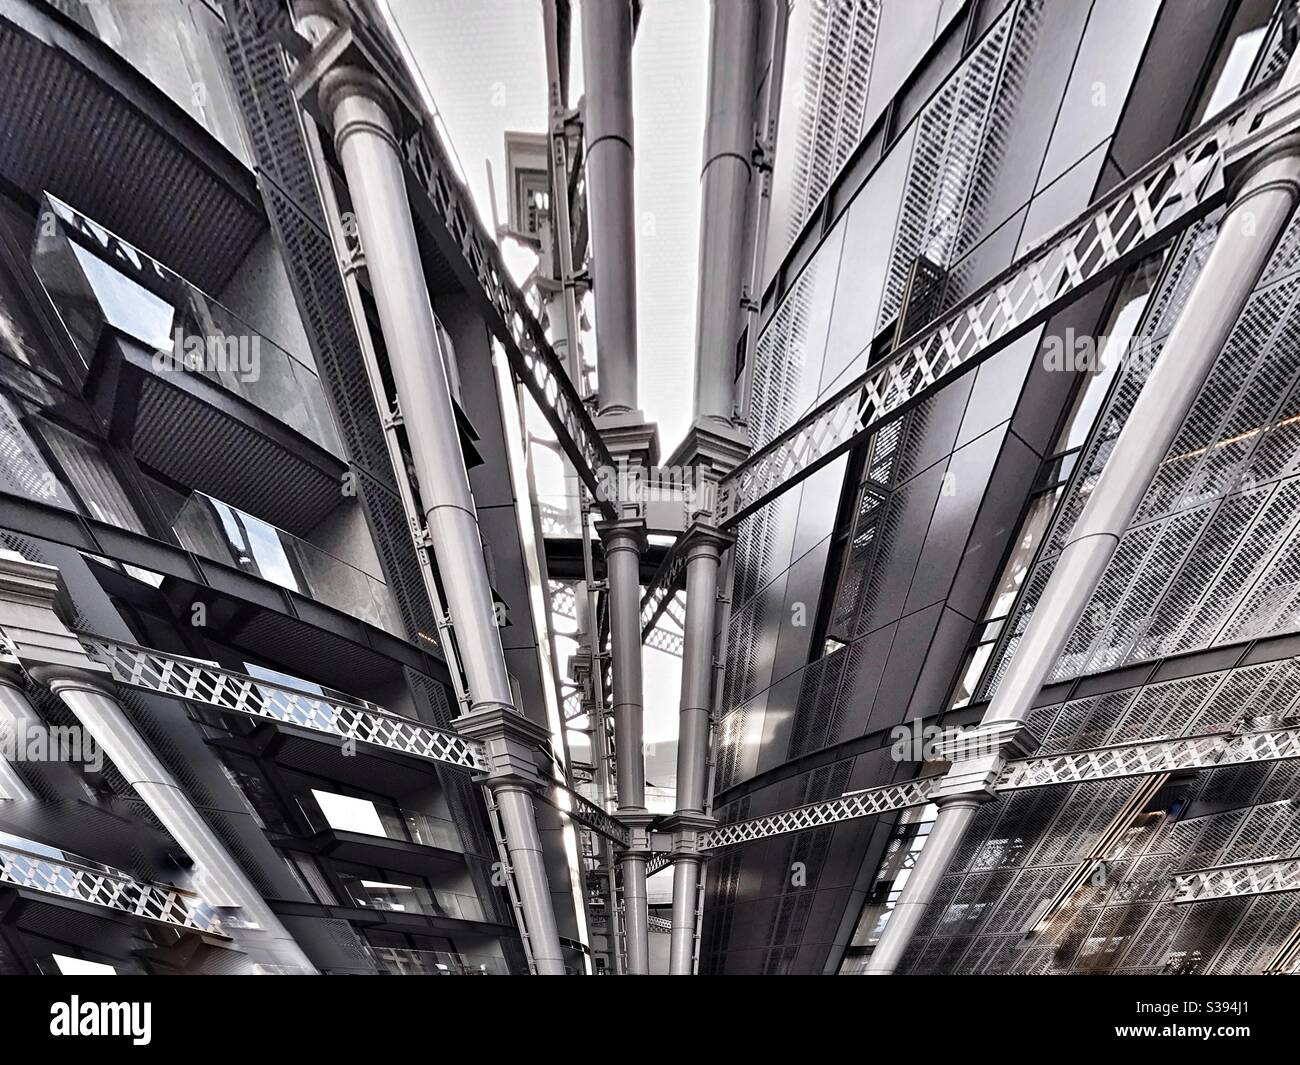 Creative view of cylindrical steelwork around flats and buildings Stock Photo